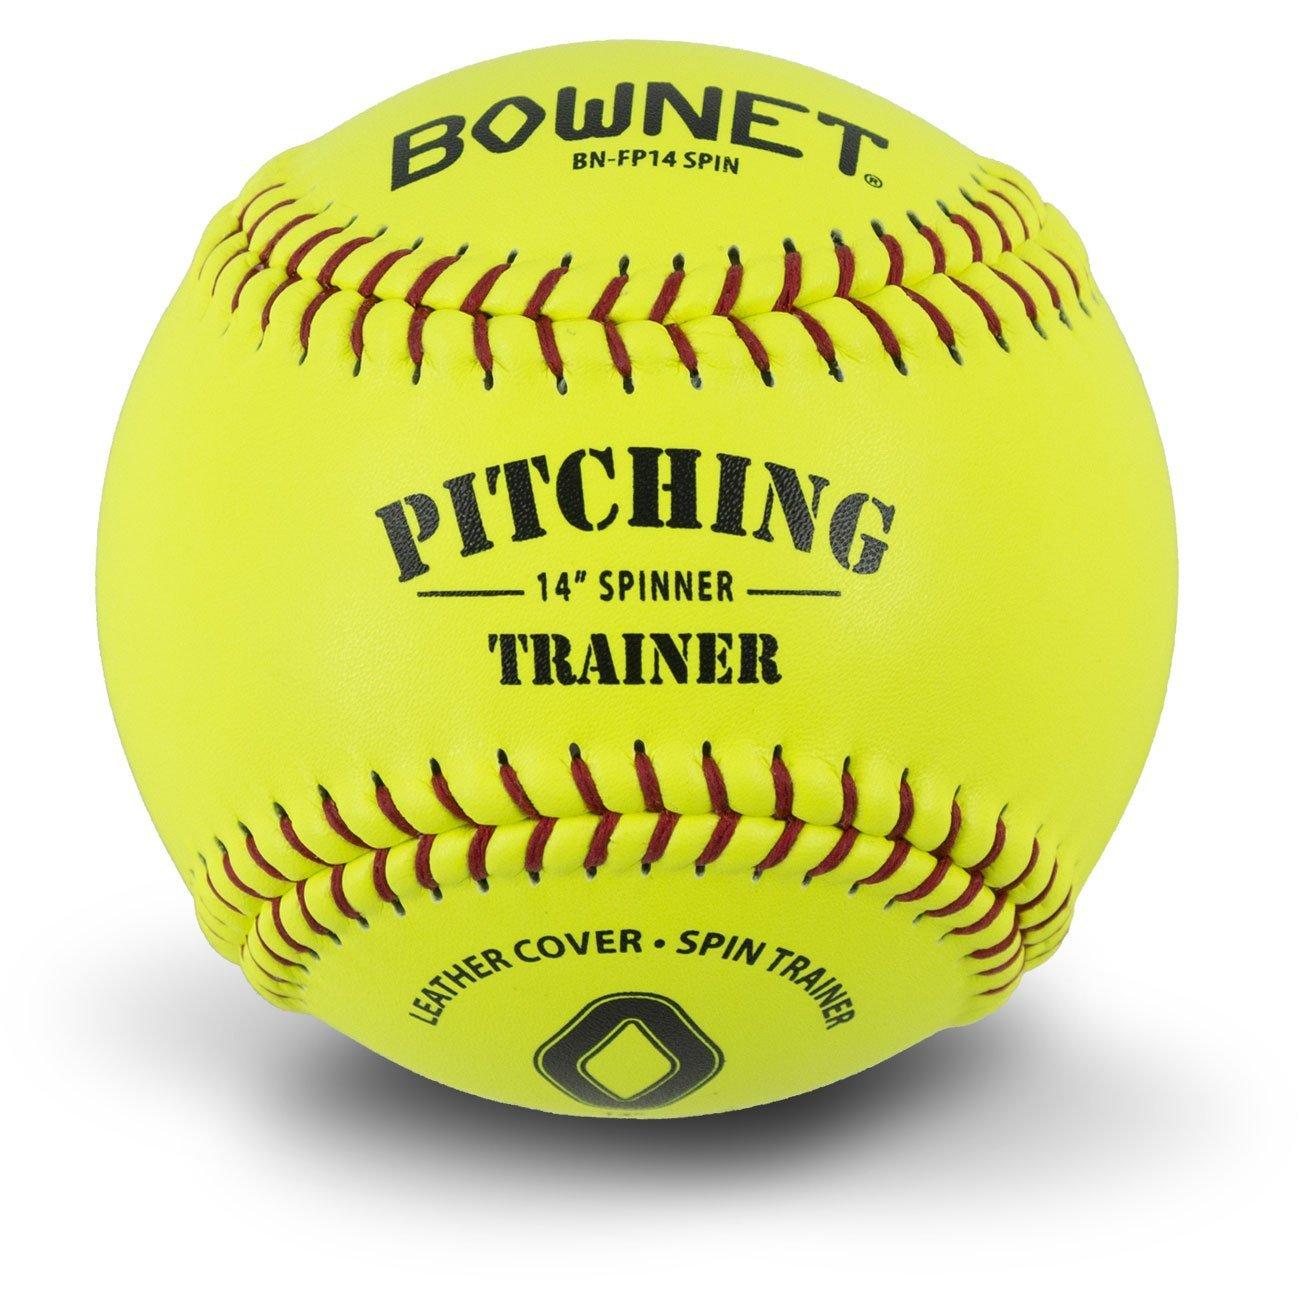 SPIN RIGHT SPINNER Fastpitch Pitching Training Aid Baseball Softball Yellow 